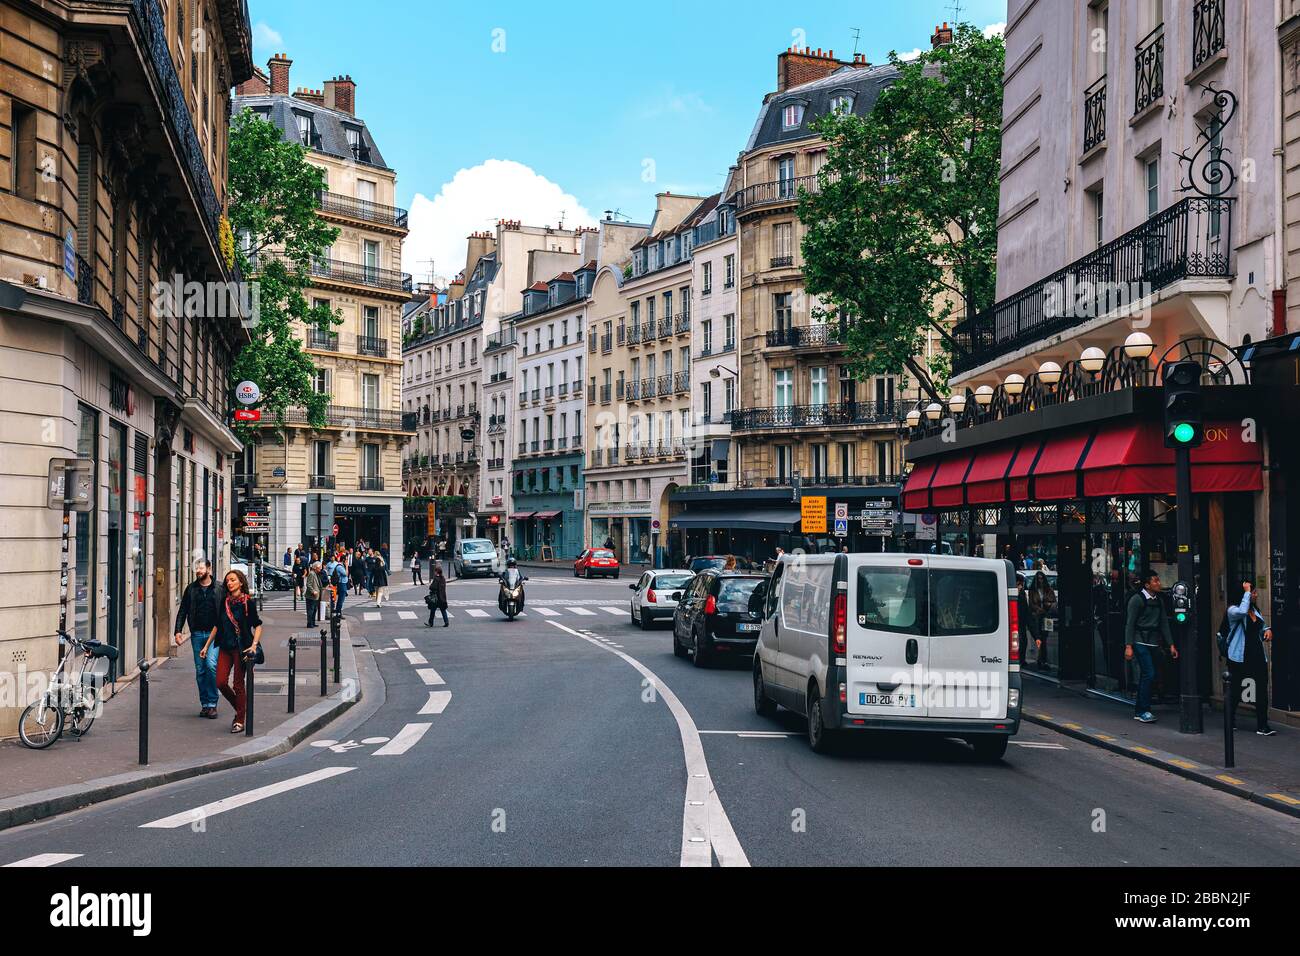 People walking on the street among typical parisian buildings in the center of Paris, France. Stock Photo